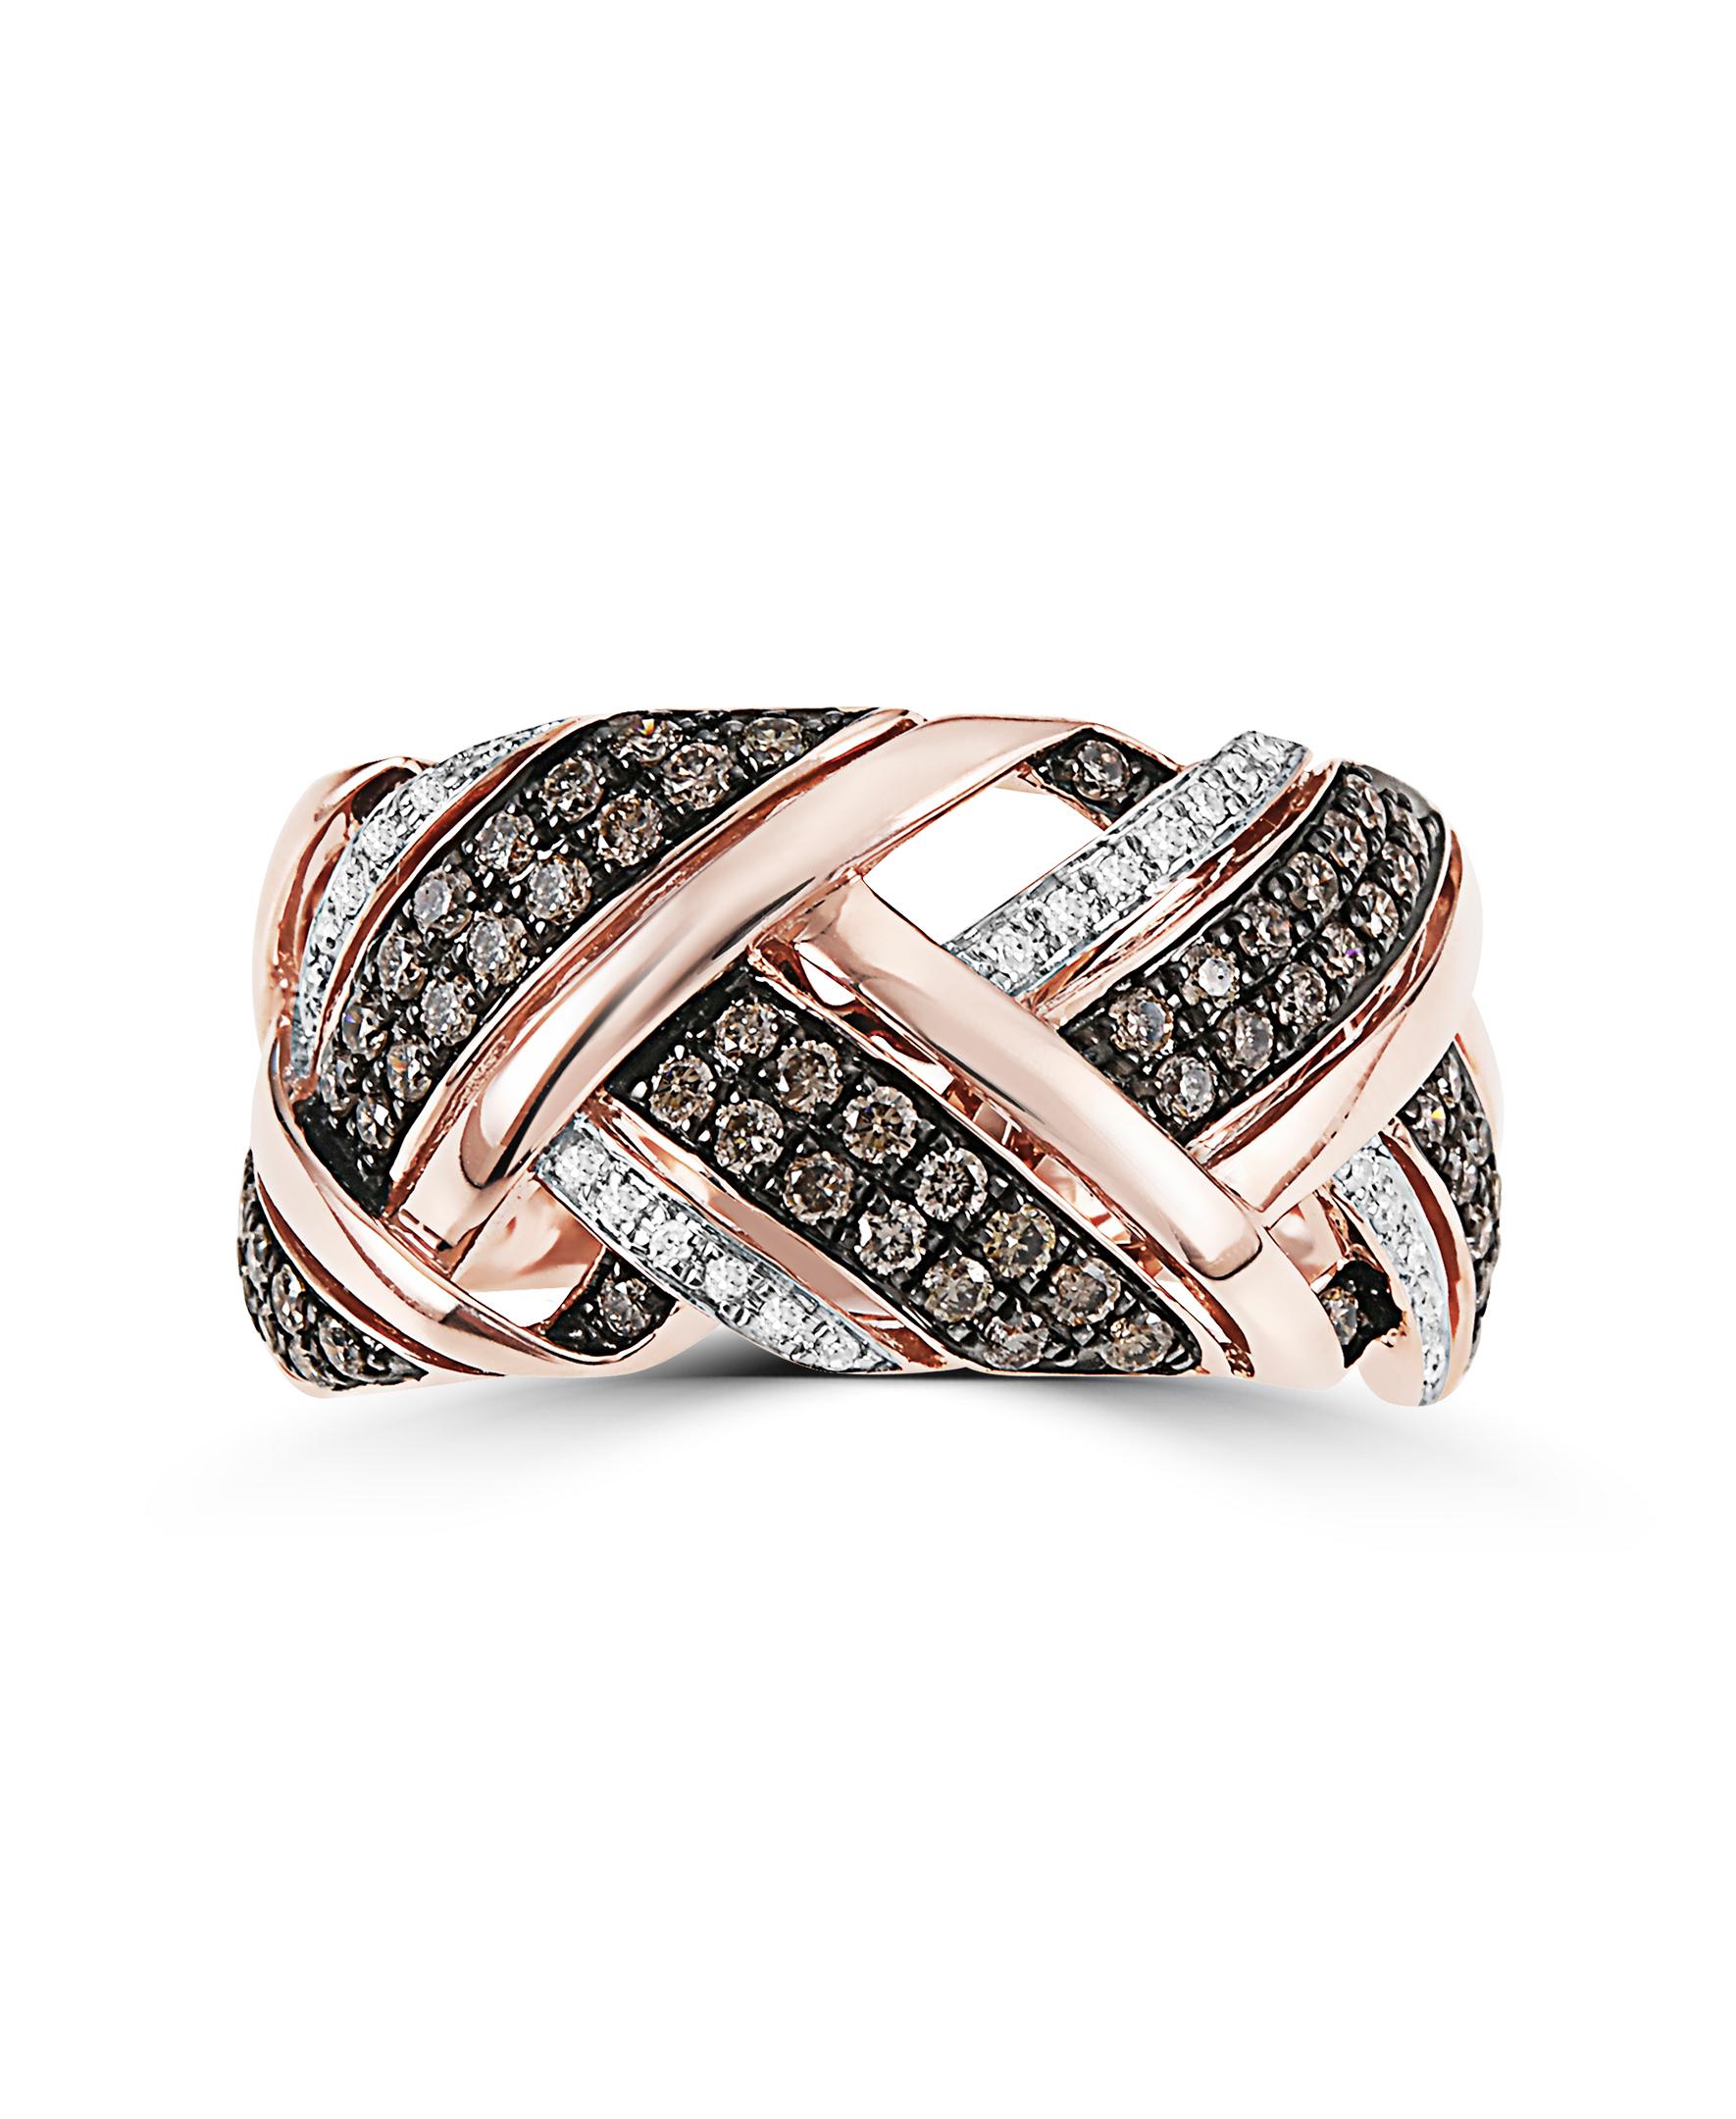 This Effy design ring is set in 14K Rose gold. 
The diamonds are round in shape, in a combination of white and brown colors, and the total weight is 0.55ct.

This ring is a sizable 7. 

The item number is X726.